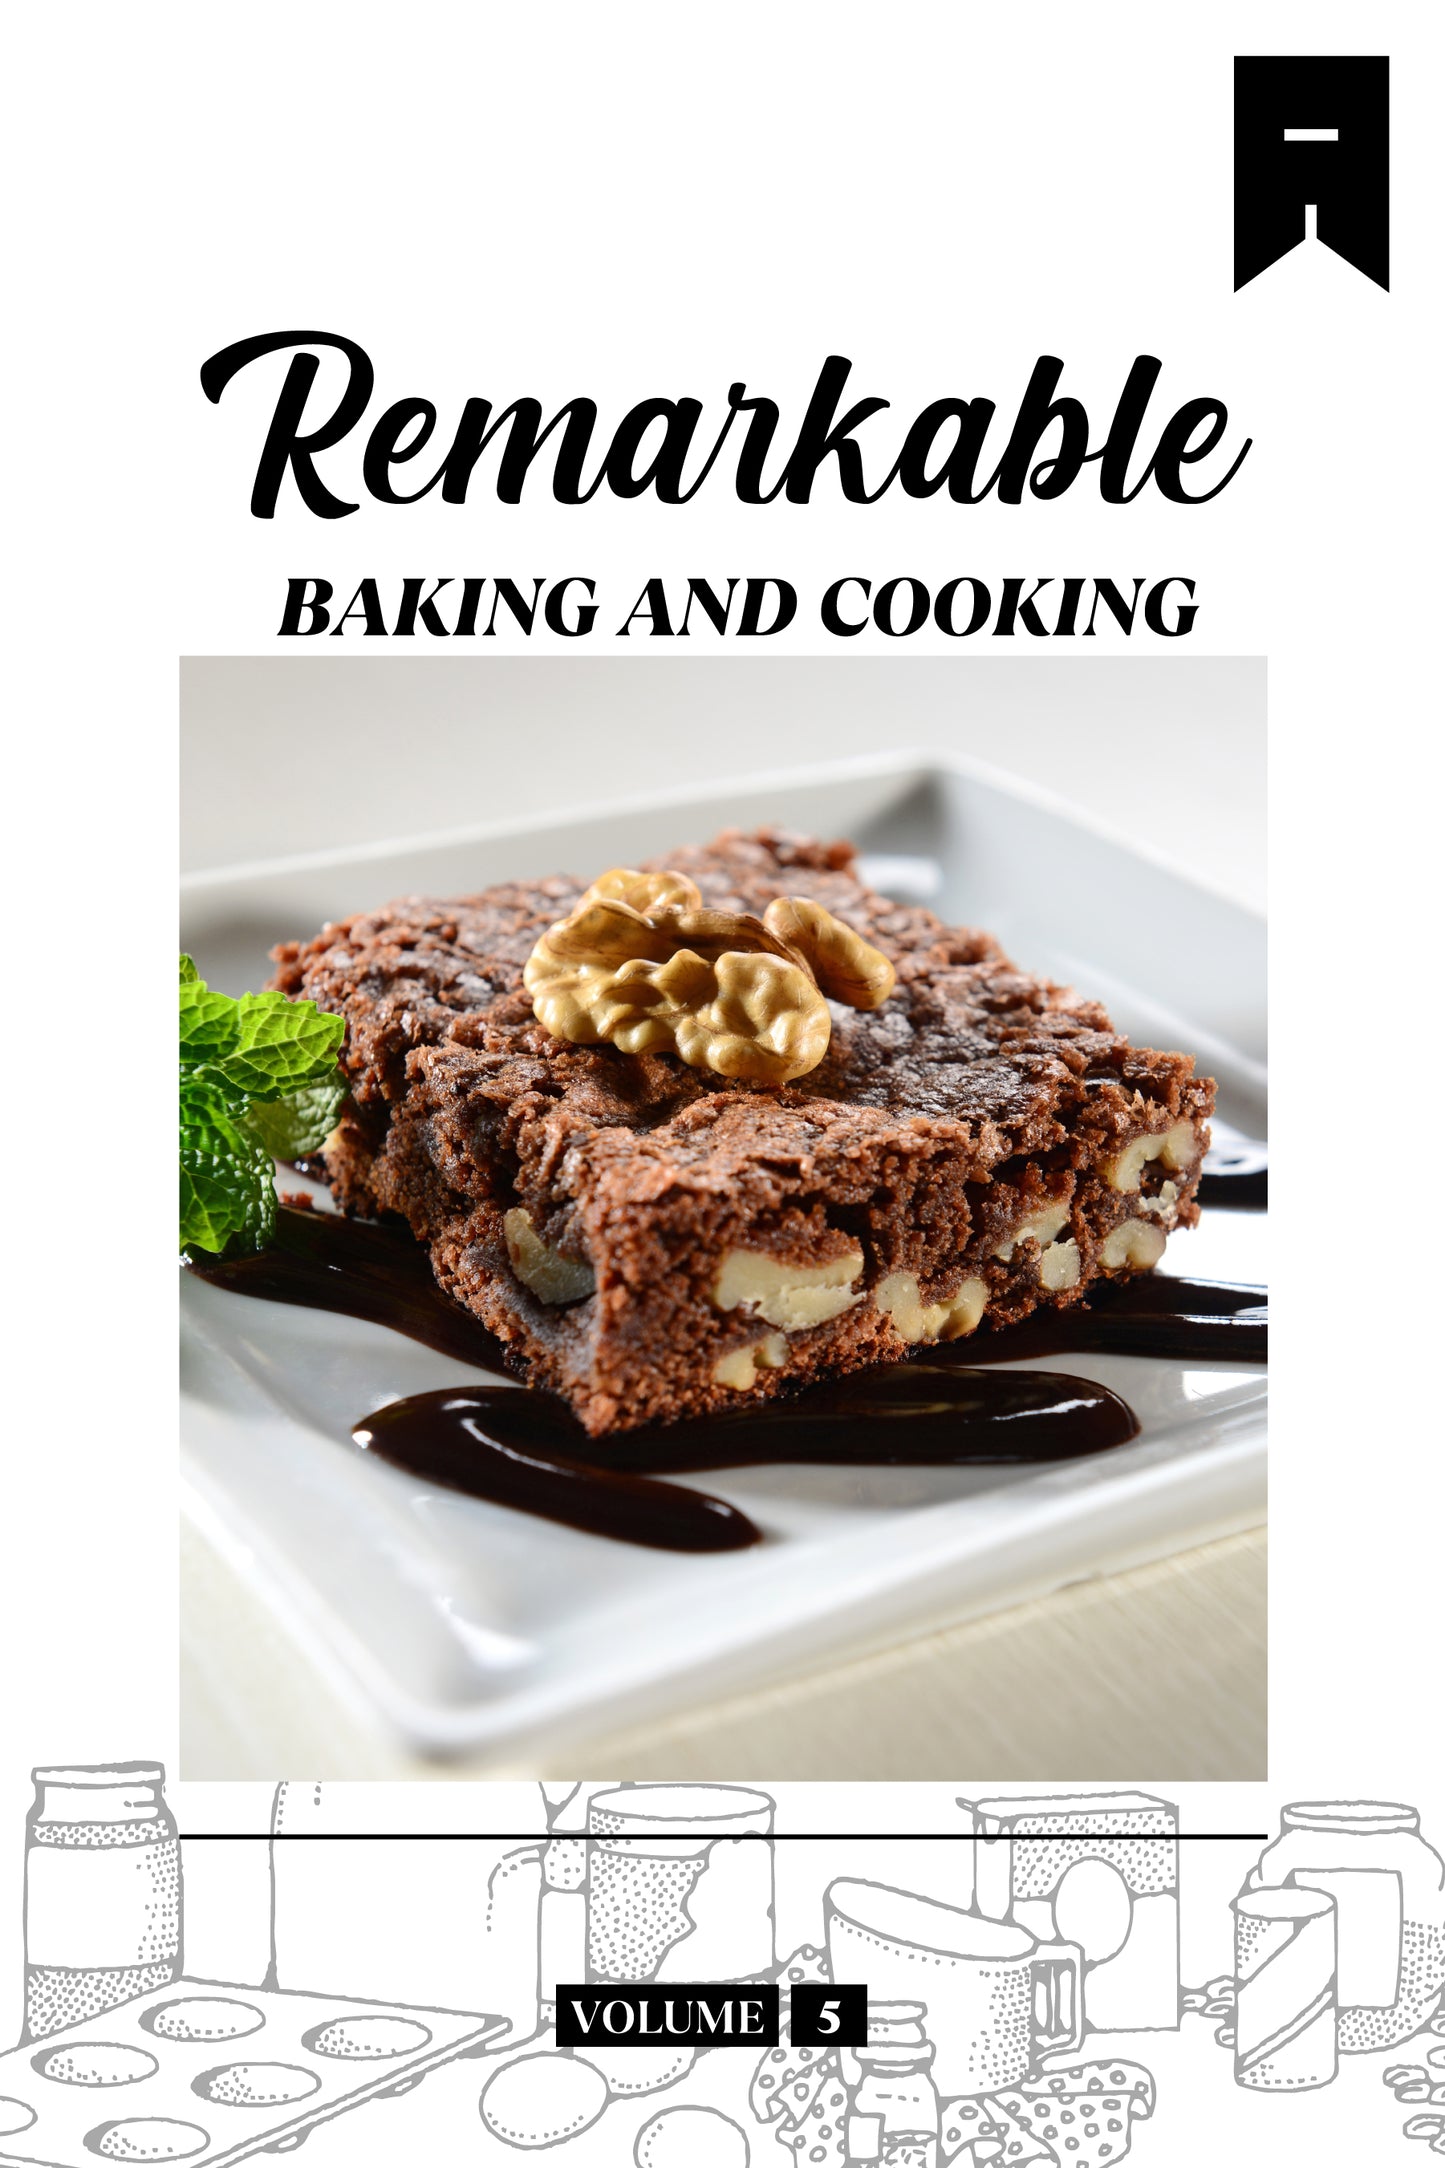 Remarkable Baking (Volume 5) - Physical Book